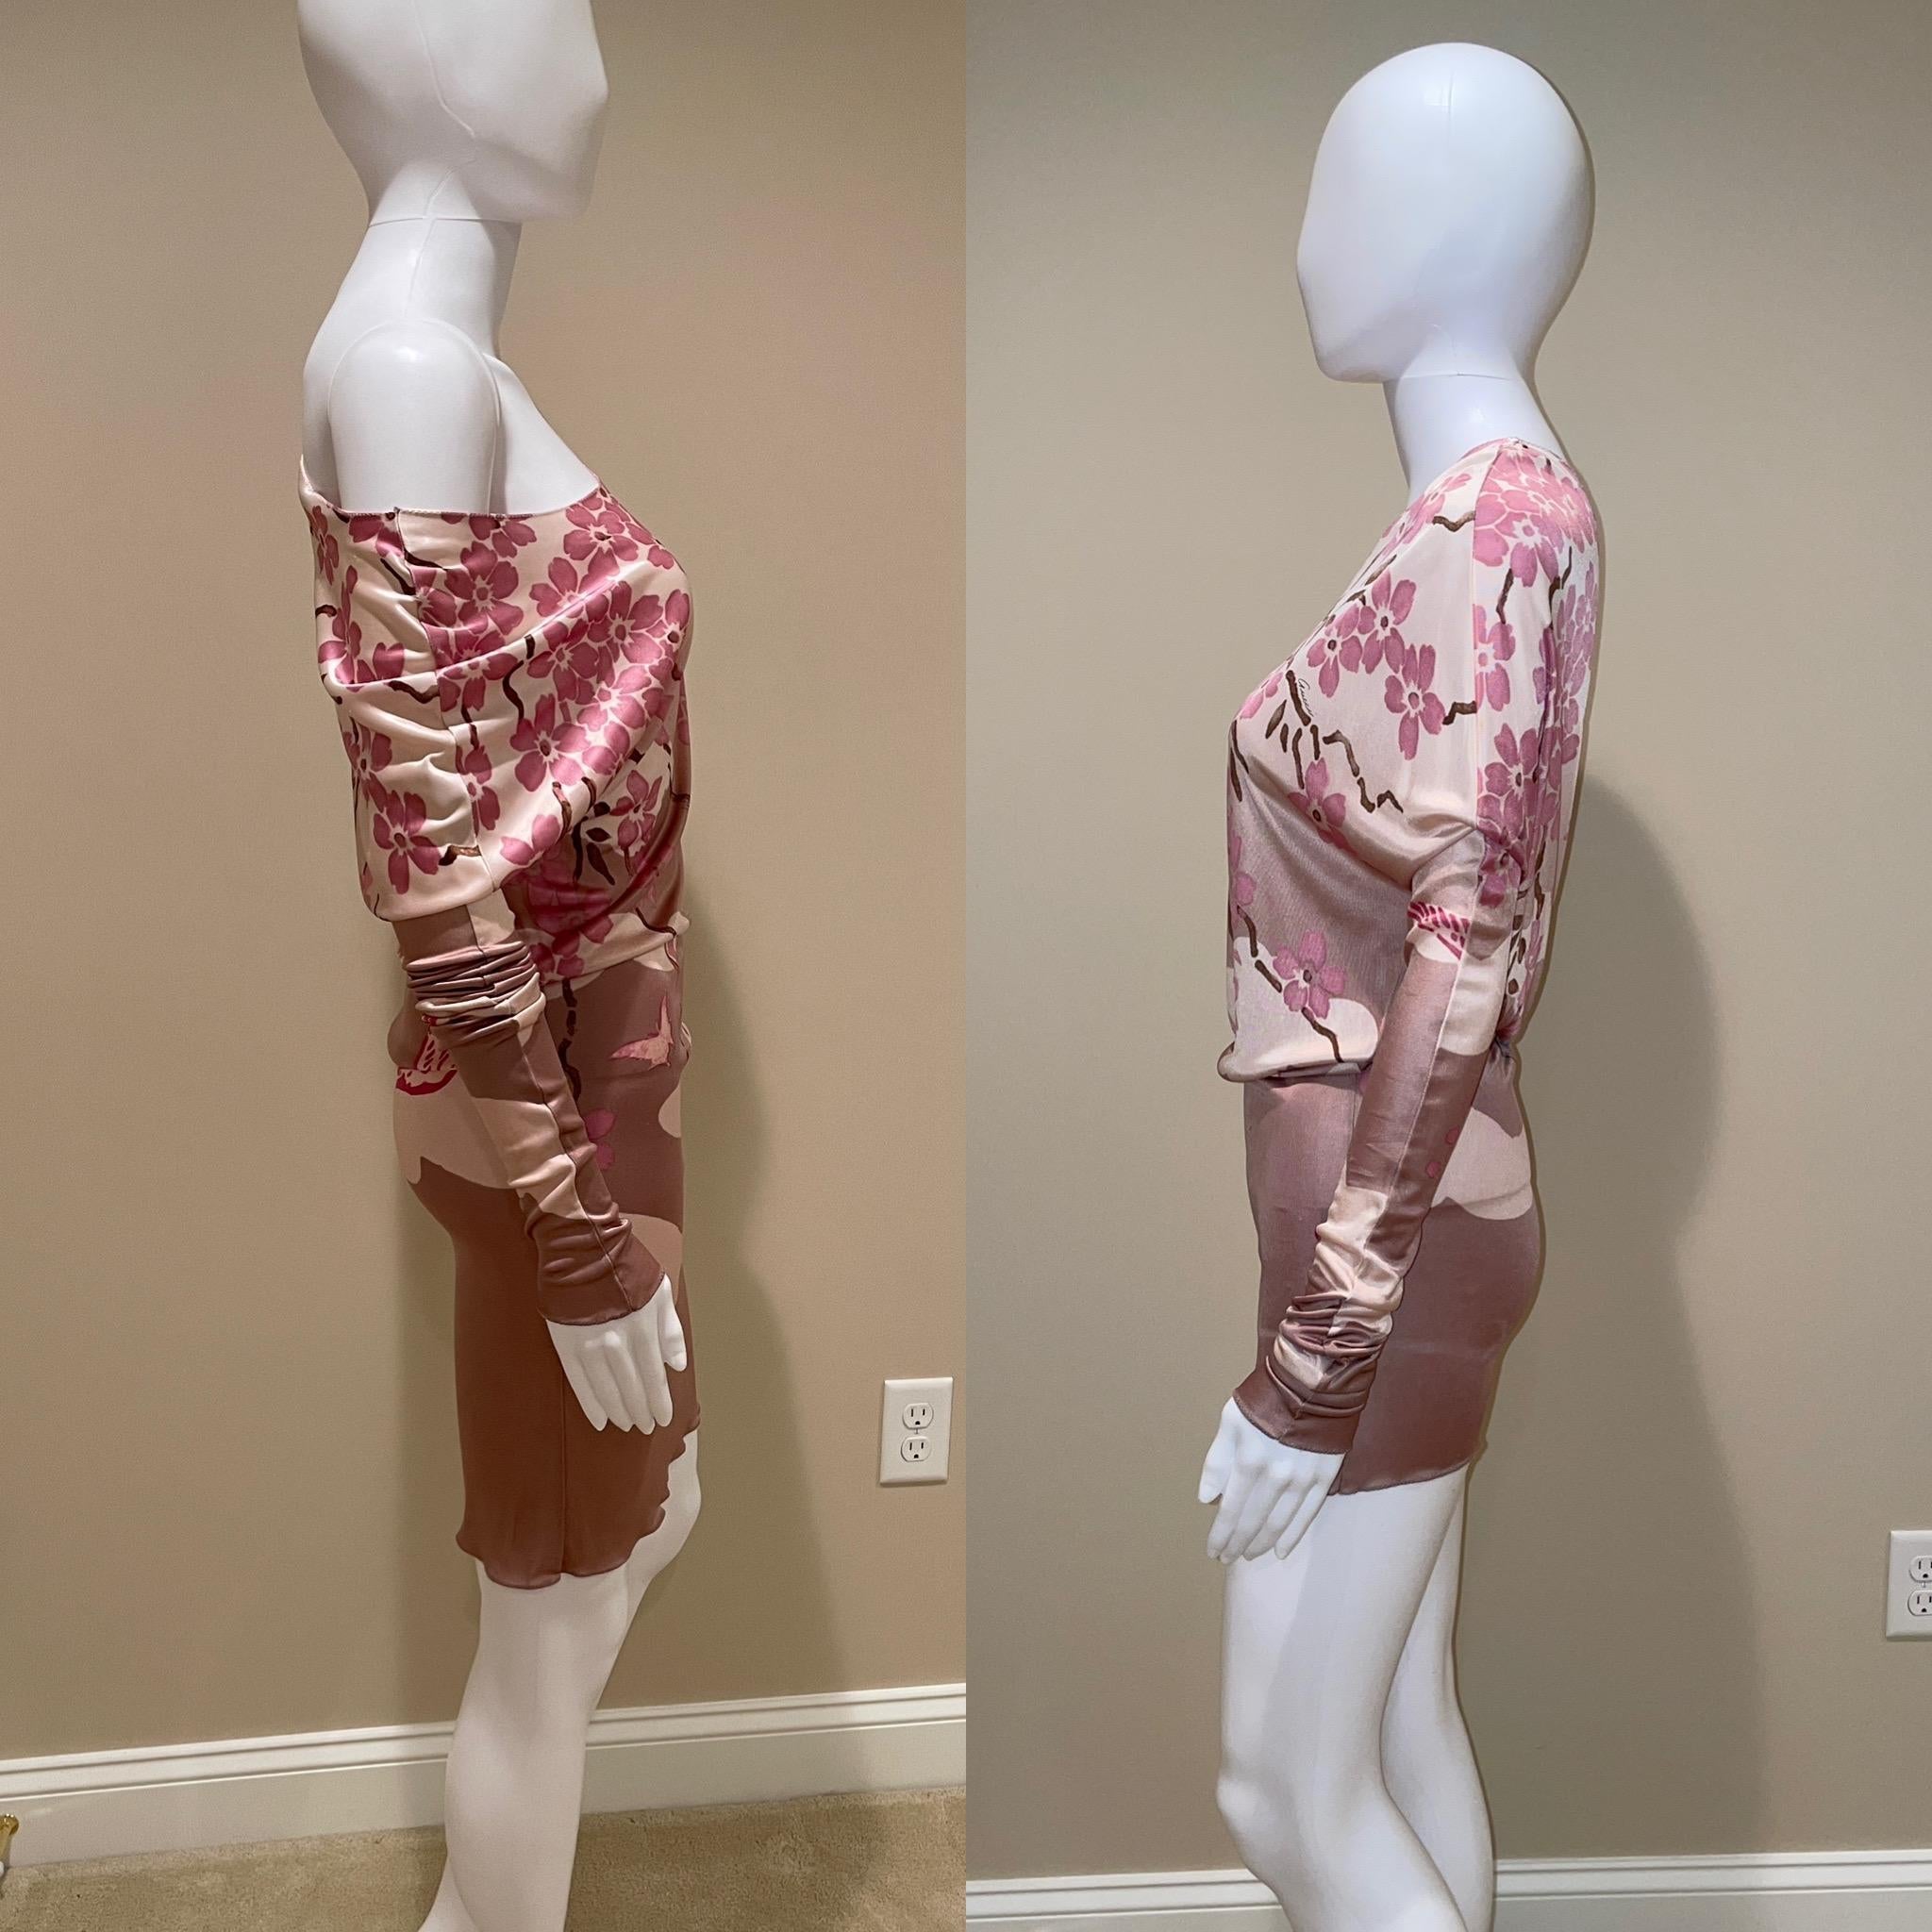 FINAL SALE. NO RETURNS, REFUNDS, NOR EXCHANGES.

Vintage SS03 Tom Ford for Gucci long sleeve cherry blossom mini dress. This dress could also be worn as a blouse if you wish. You can wear it off either shoulder and scrunch up the bottom as short as